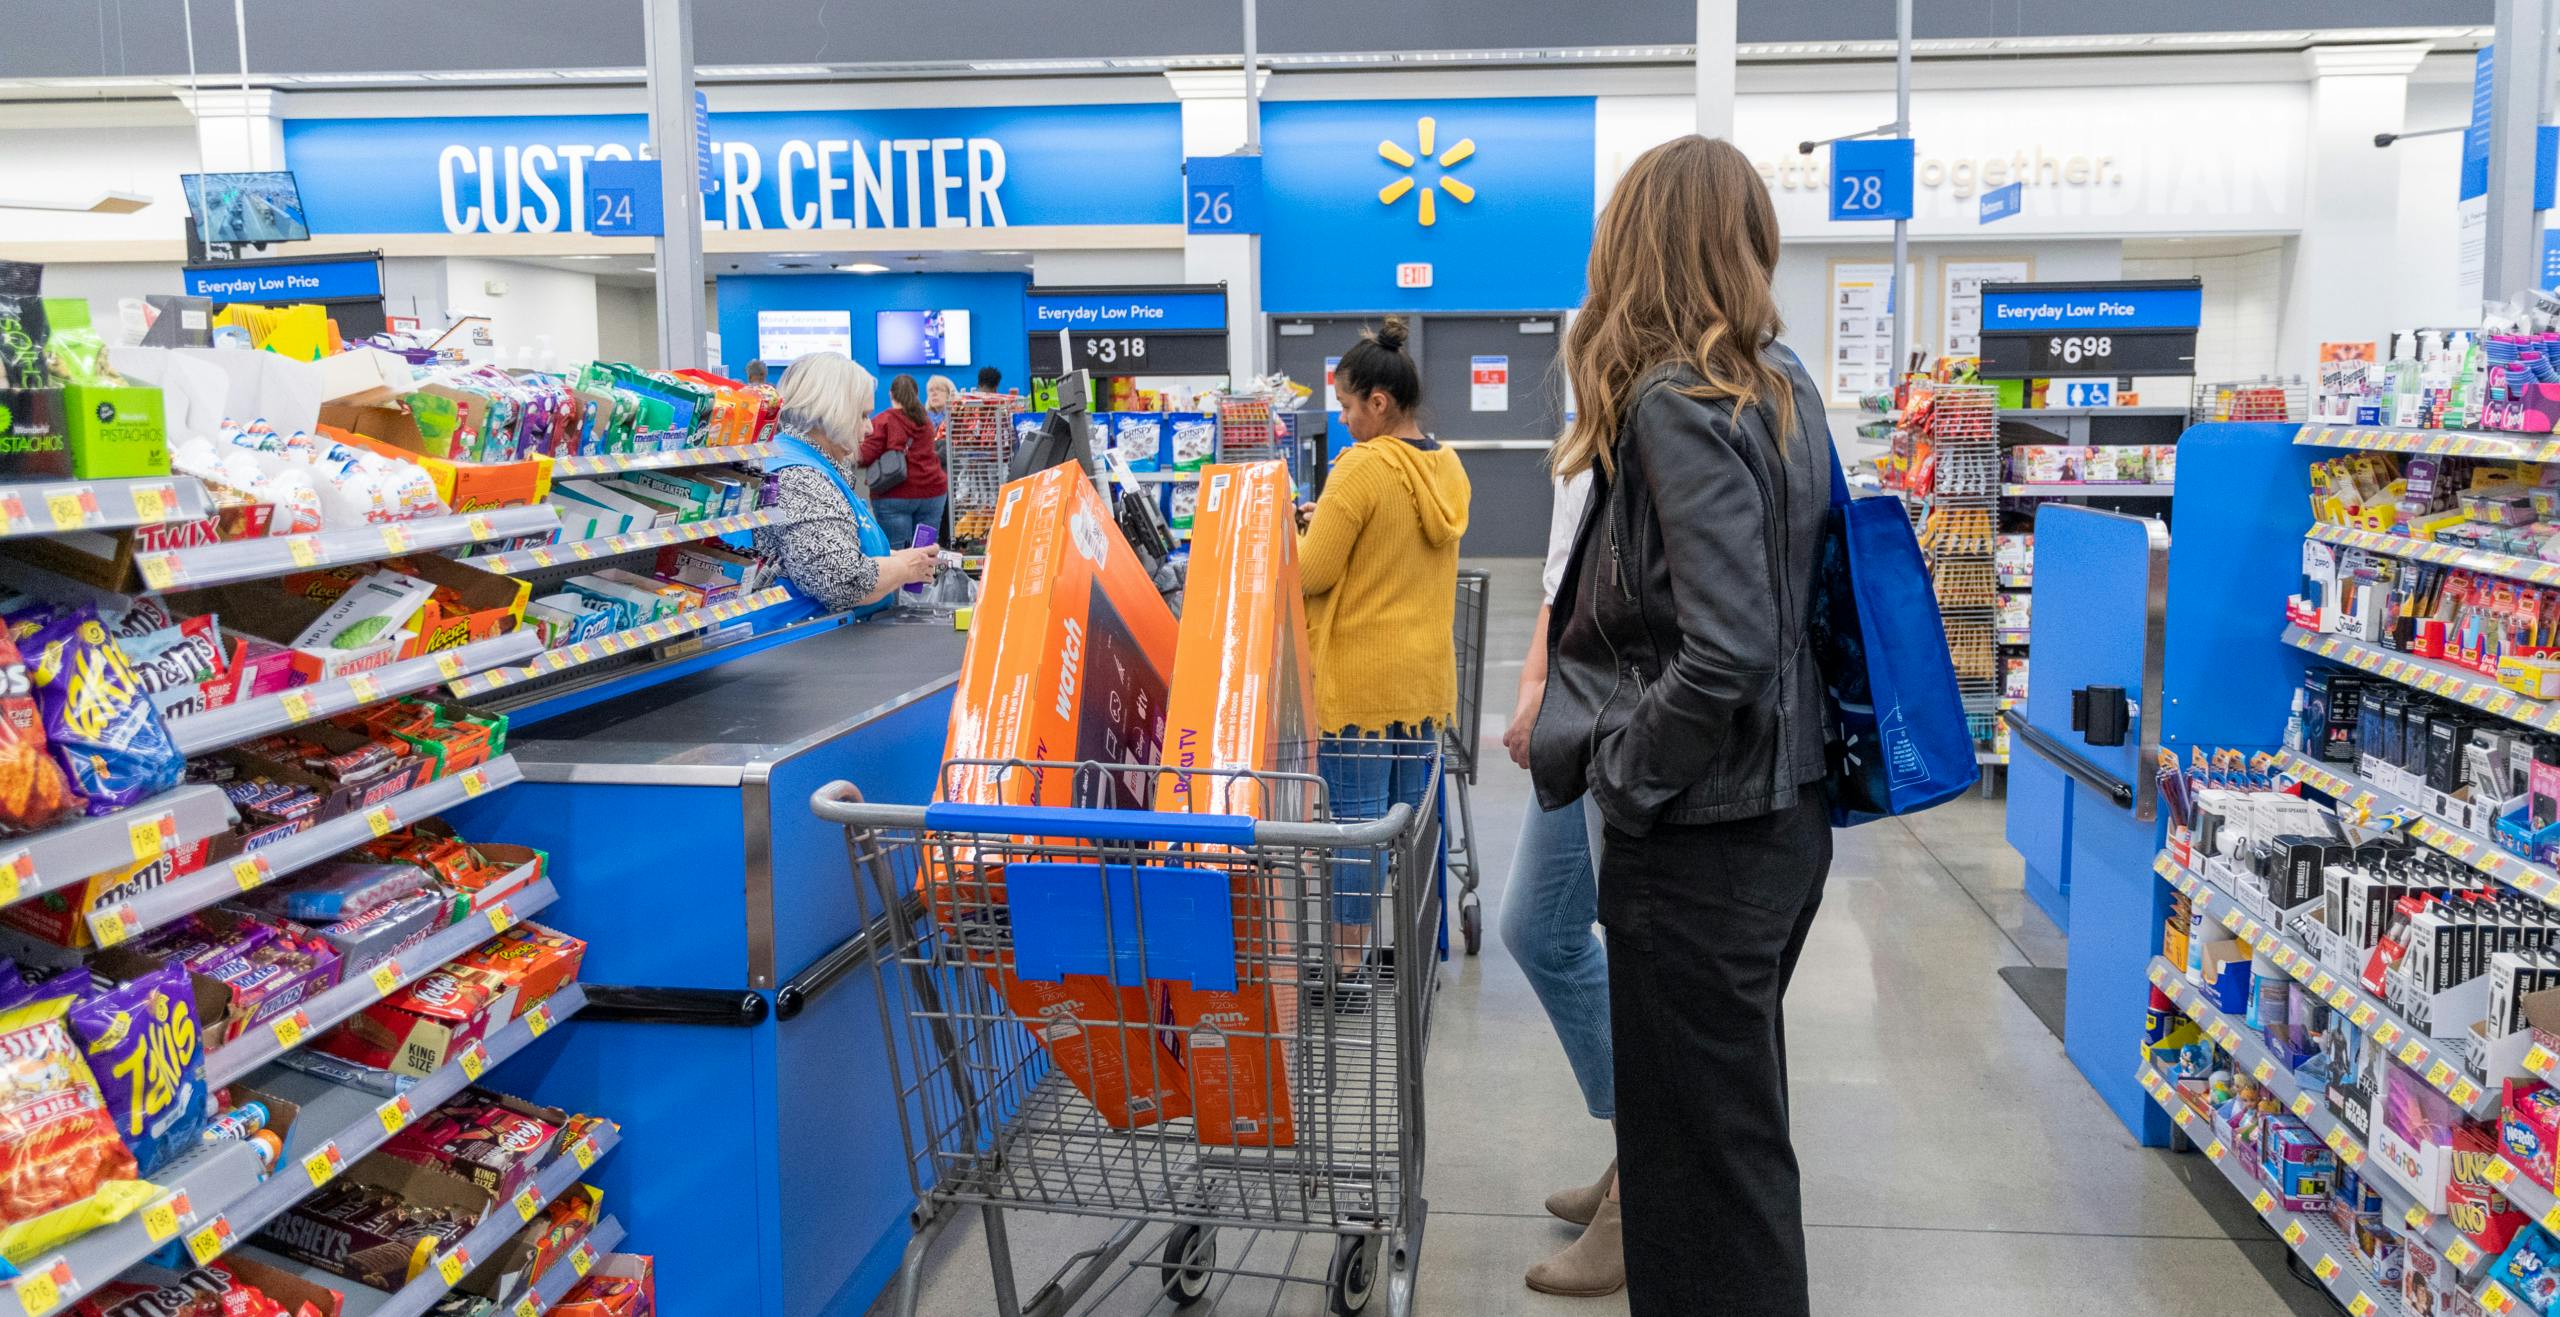 Best Walmart Rollback Deals That We're Adding to Our Cart This Month